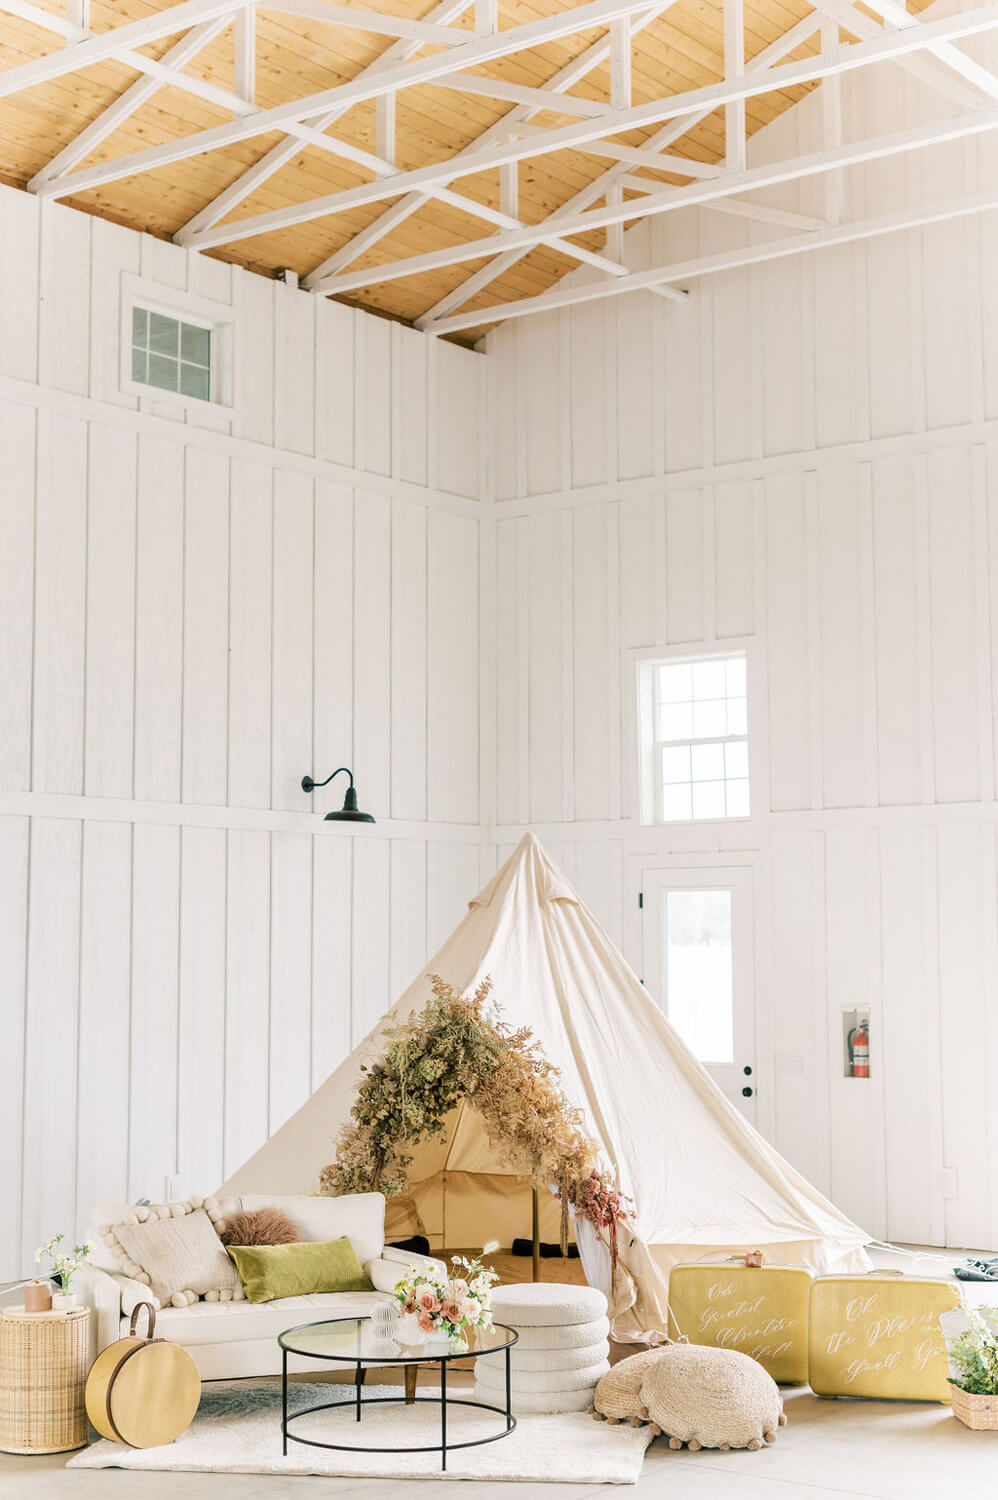 "Our Greatest Adventure Yet" neutral baby shower with fall floral teepee